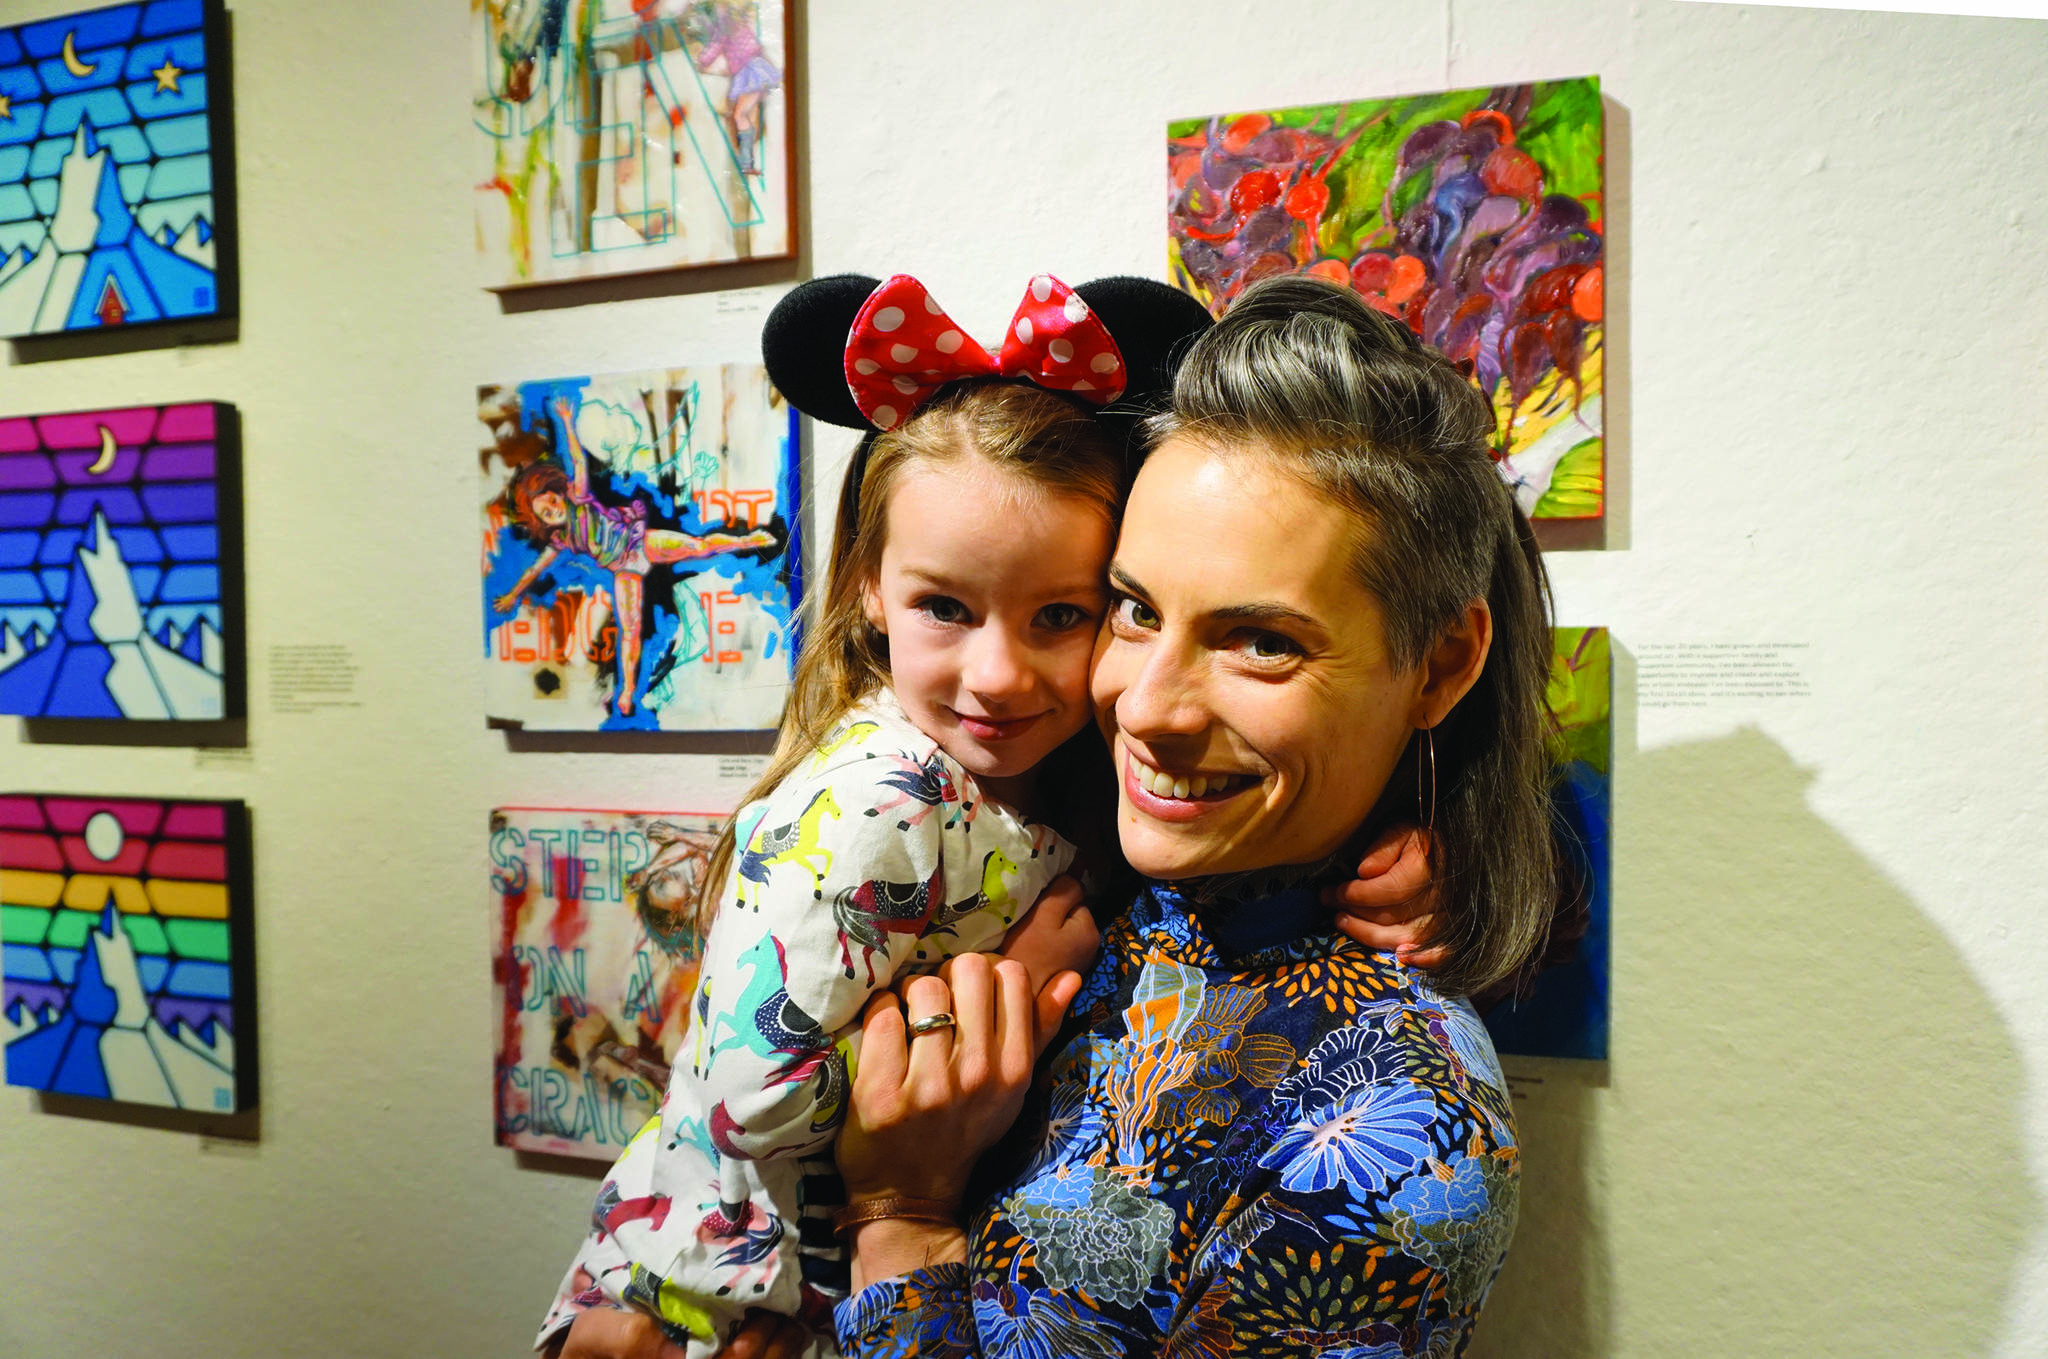 Carla Cope and her daughter, Nova, pose next to their paintings at left at the Nov. 8, 2019, opening of the 10x10 show at Bunnell Street Arts Center in Homer, Alaska. Nova painted the background elements to the paintings and her mother added to that. (Photo by Michael Armstrong/Homer News)